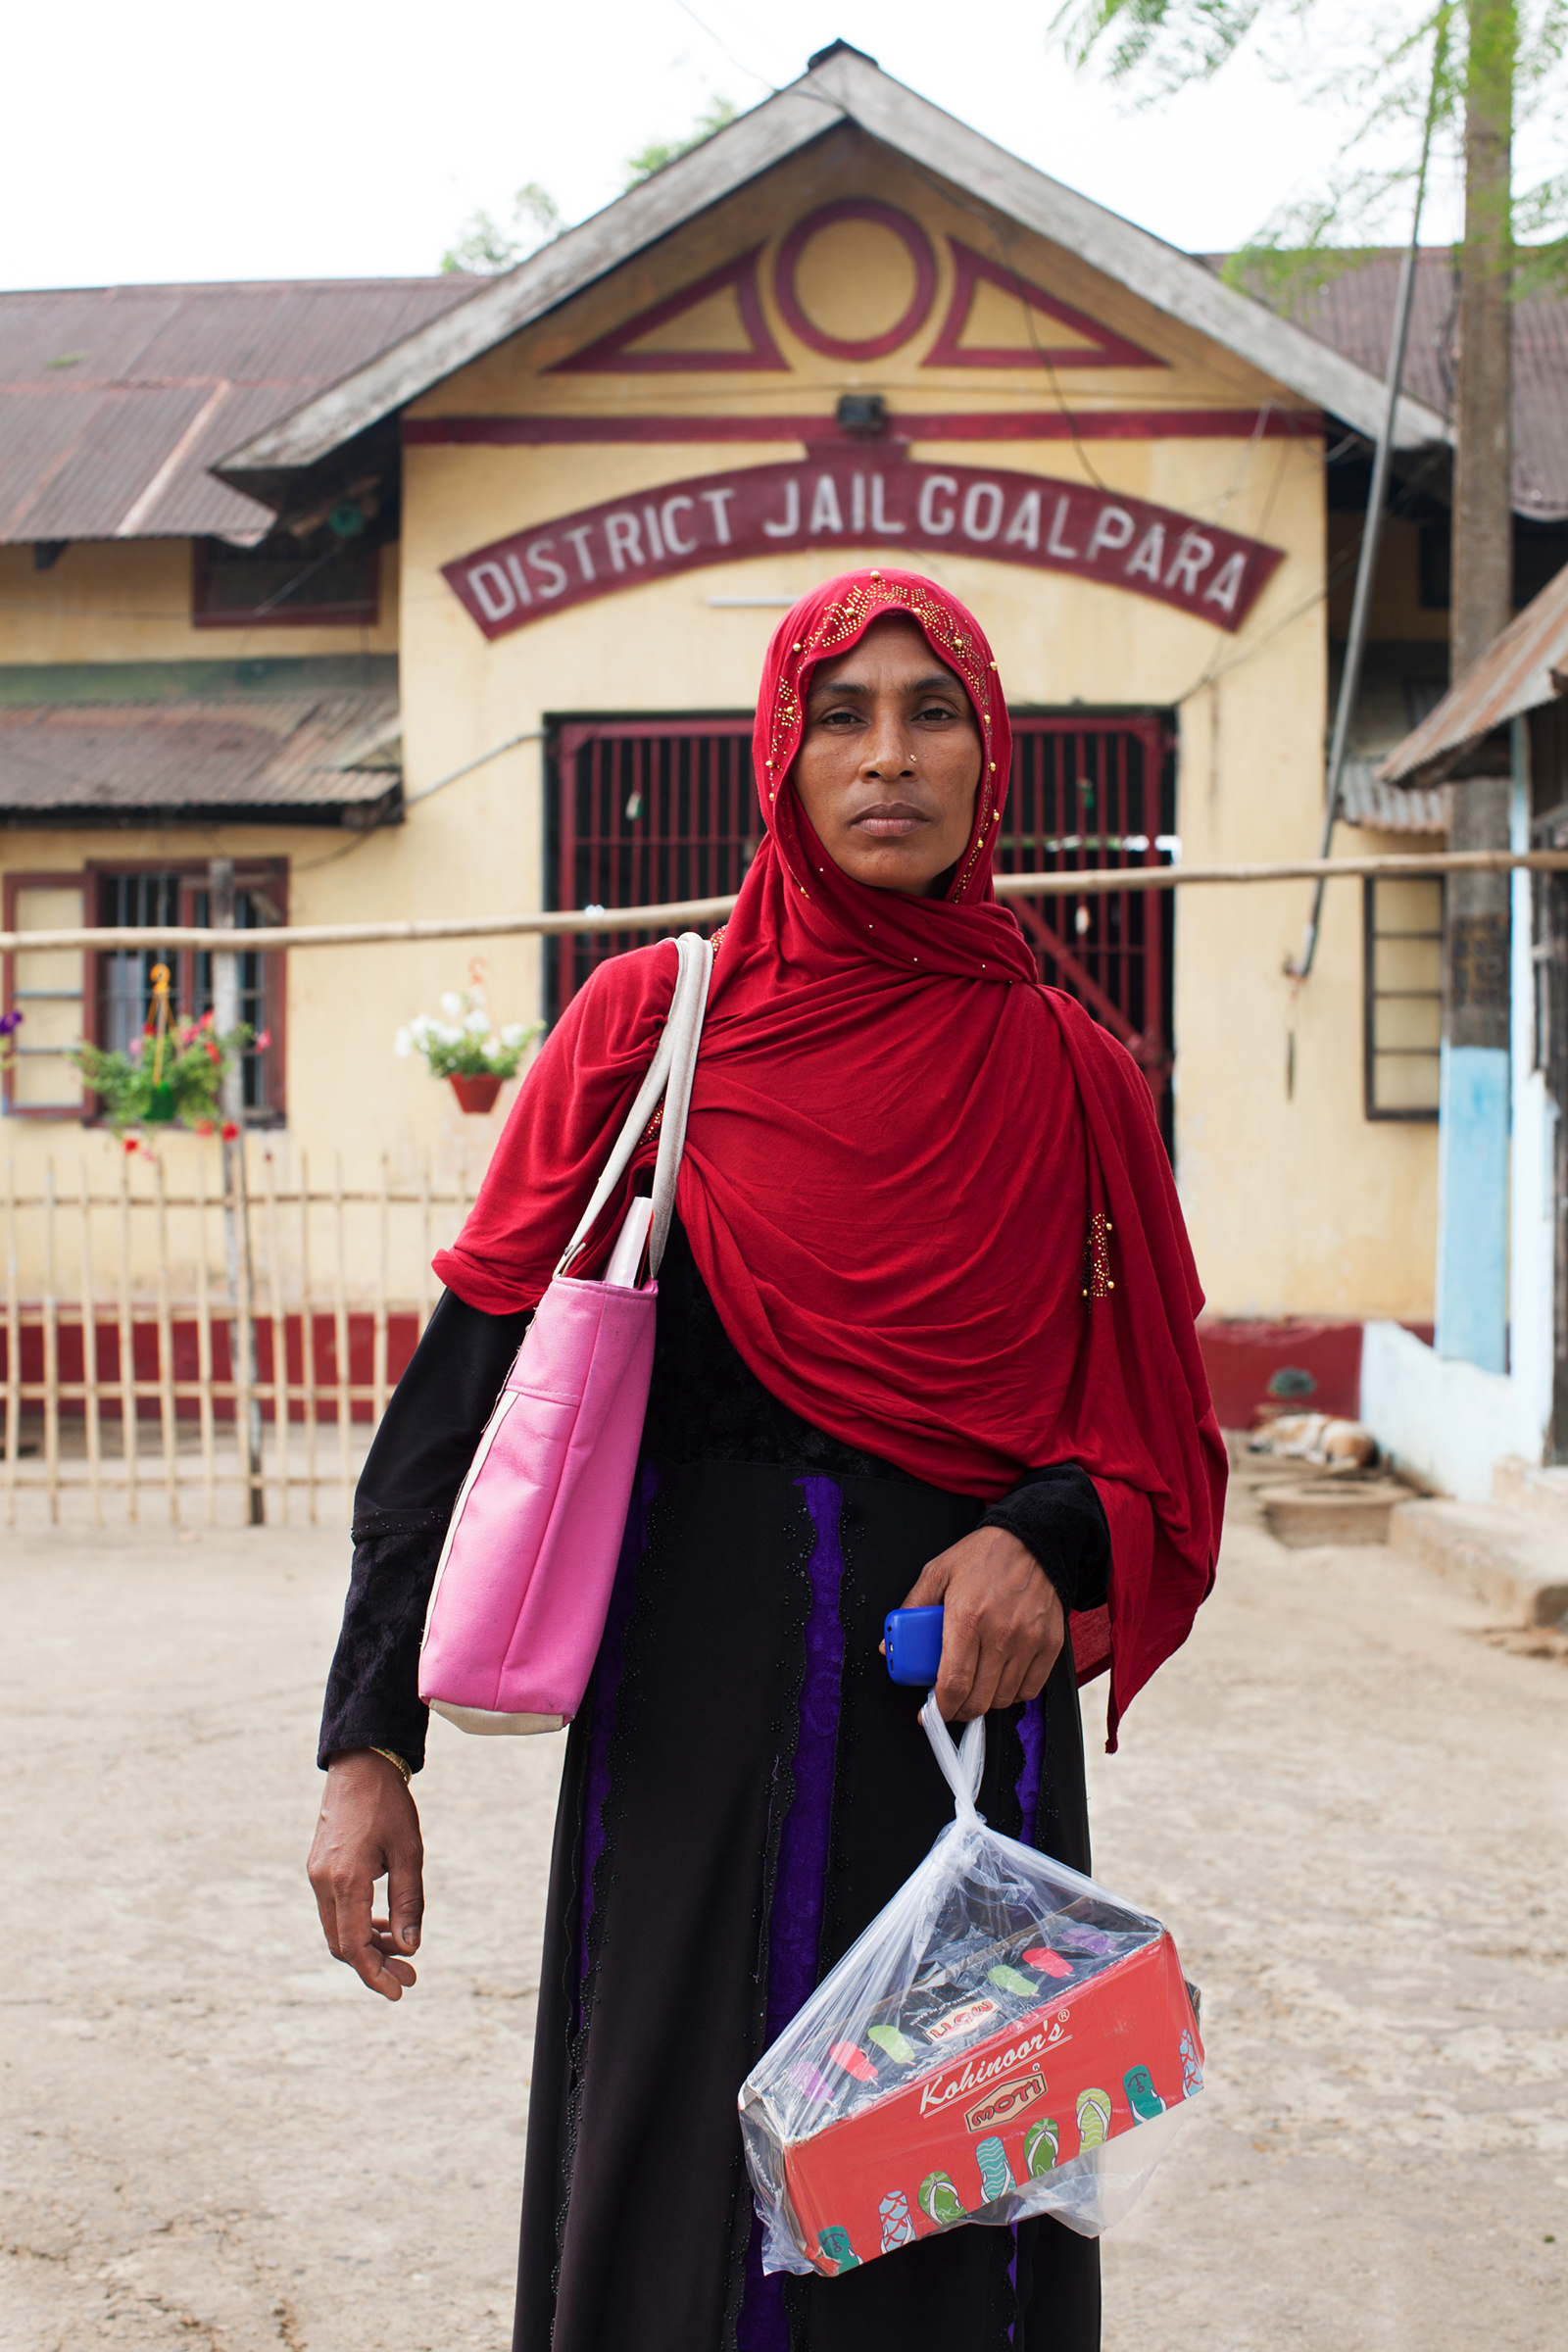 Samiran Nesa outside Goalpara district jail, where she is visiting her husband, Sohidul Islam, and carrying shoes to give him. He has been detained since December 2019, after a foreigners tribunal declared him an illegal immigrant.